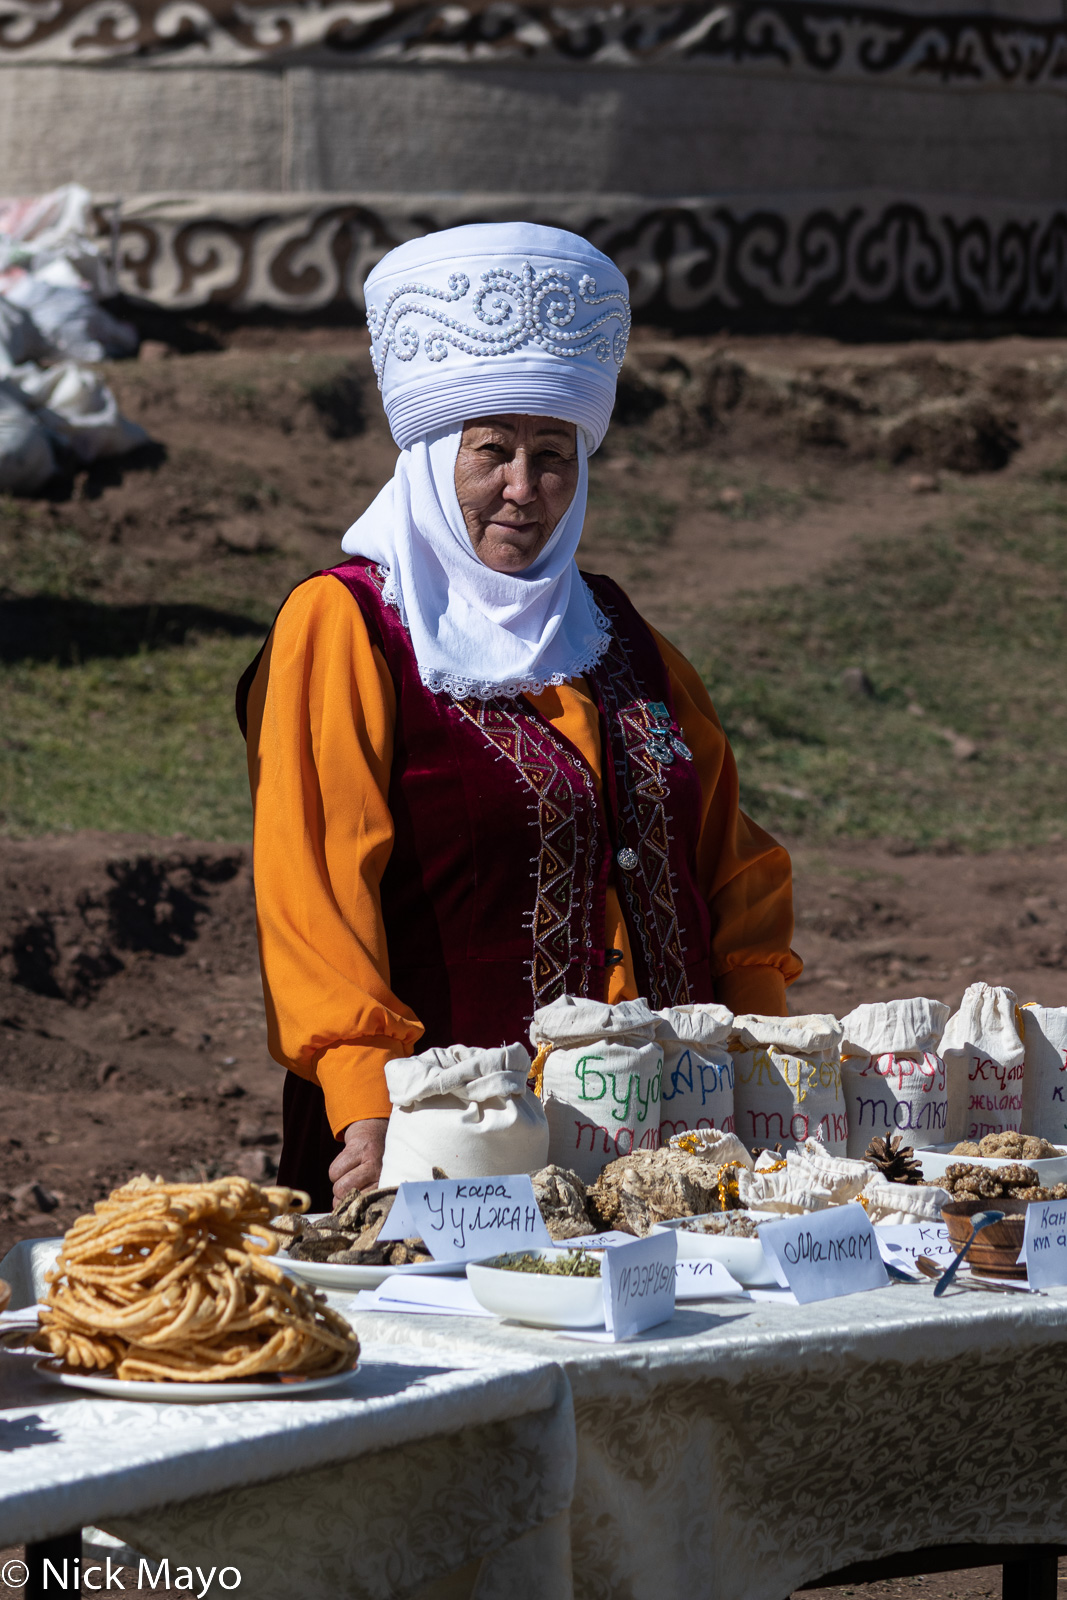 An attendee in traditional dress and elechek headdress at the Independence Day festival at Chunkurchak.